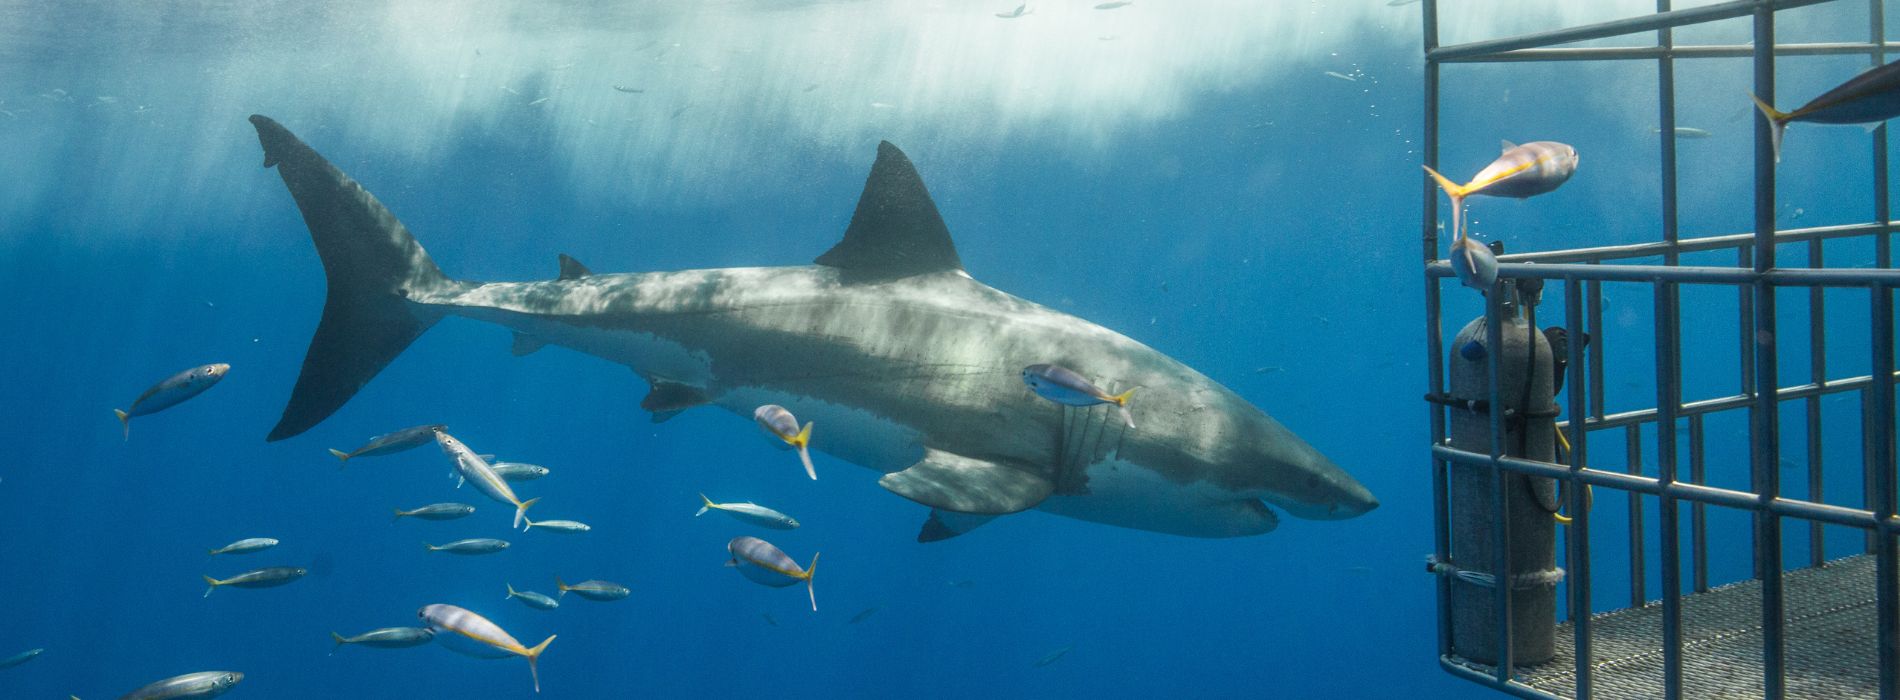 Shark Cage Diving in Key West - An Unforgettable Experience - Madeinsea©